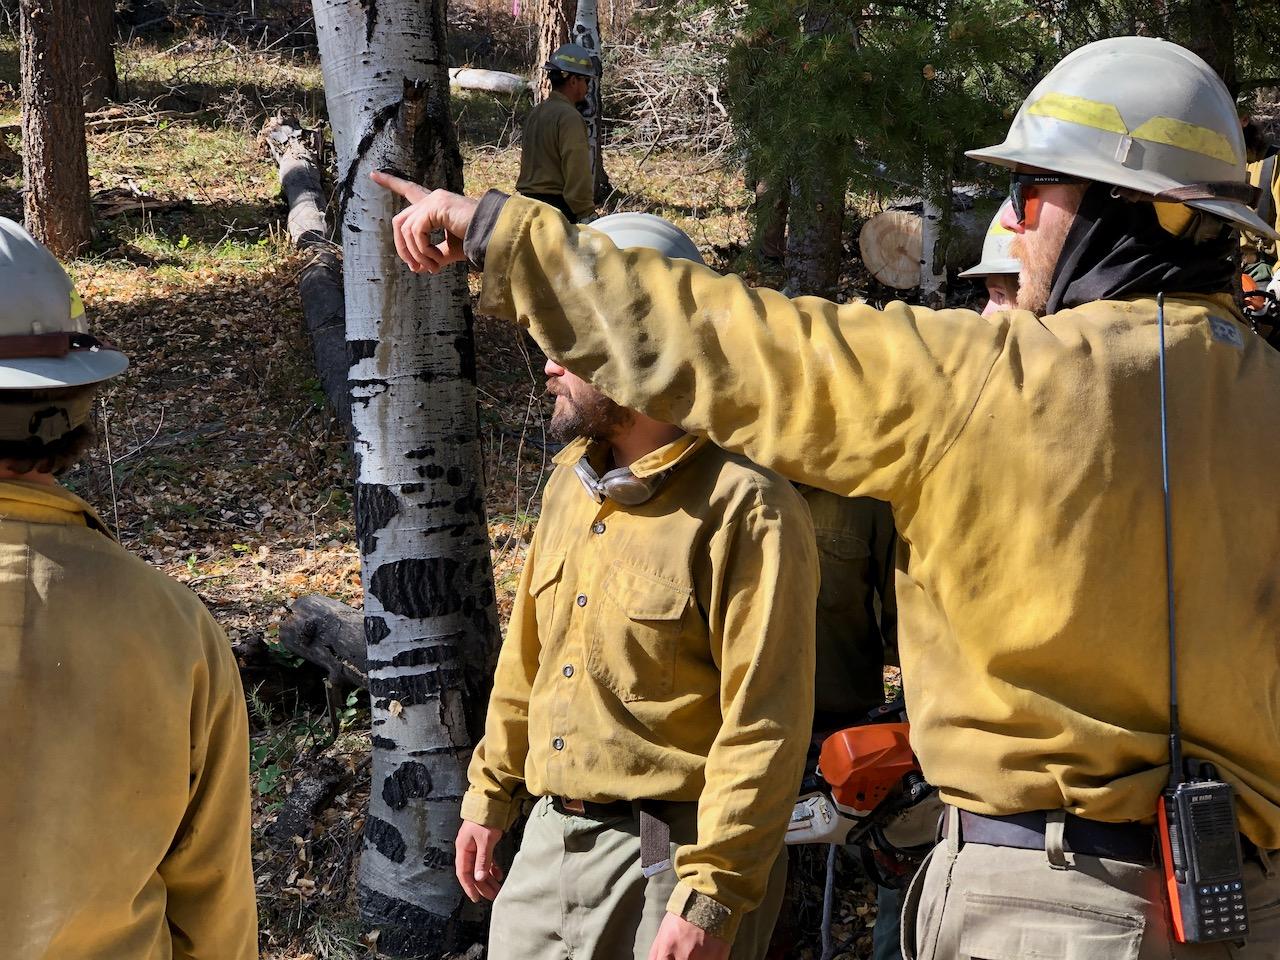 A firefighter wearing a yellow shirt, tan pants, and a hard hat, with a radio on his hip, points down the road to show the other firefighters something.